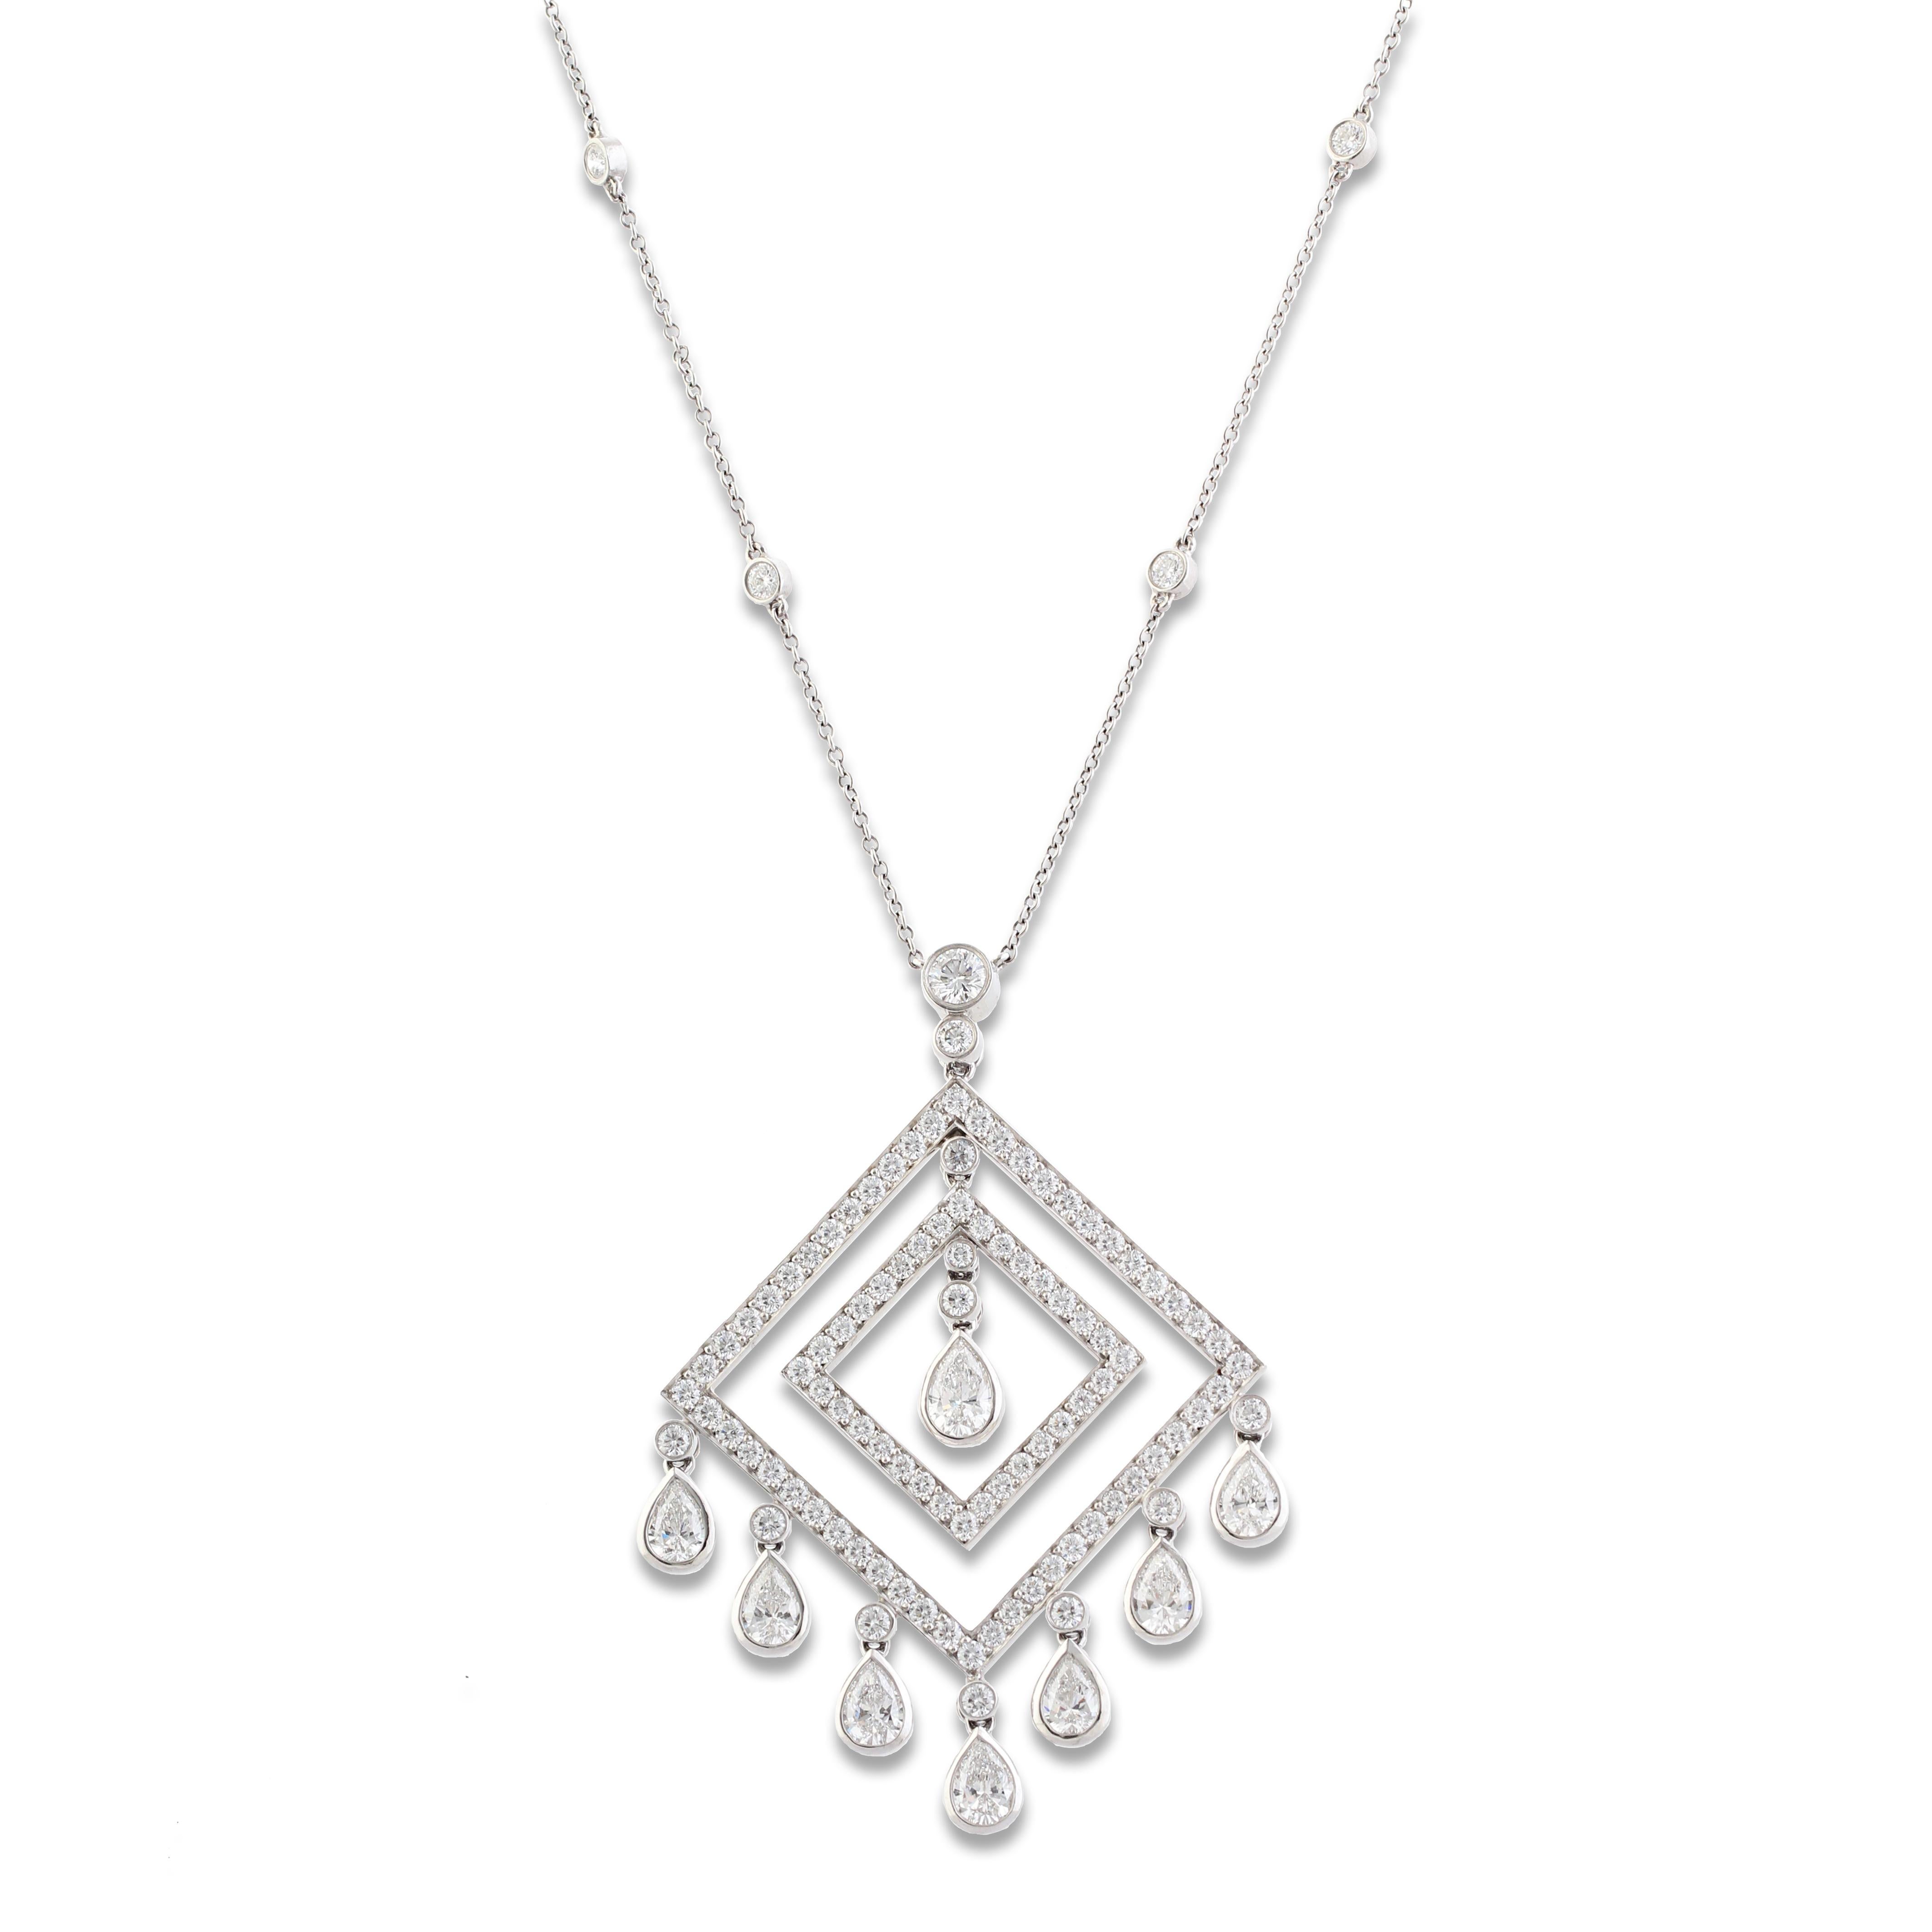 A stunning set by Tiffany & Co consisting of a platinum and diamond lozenge design pair of earrings and pendant necklace. The earrings and pendant are set with delicate pear shape diamond drops and the pendant hangs from a very fine platinum chain